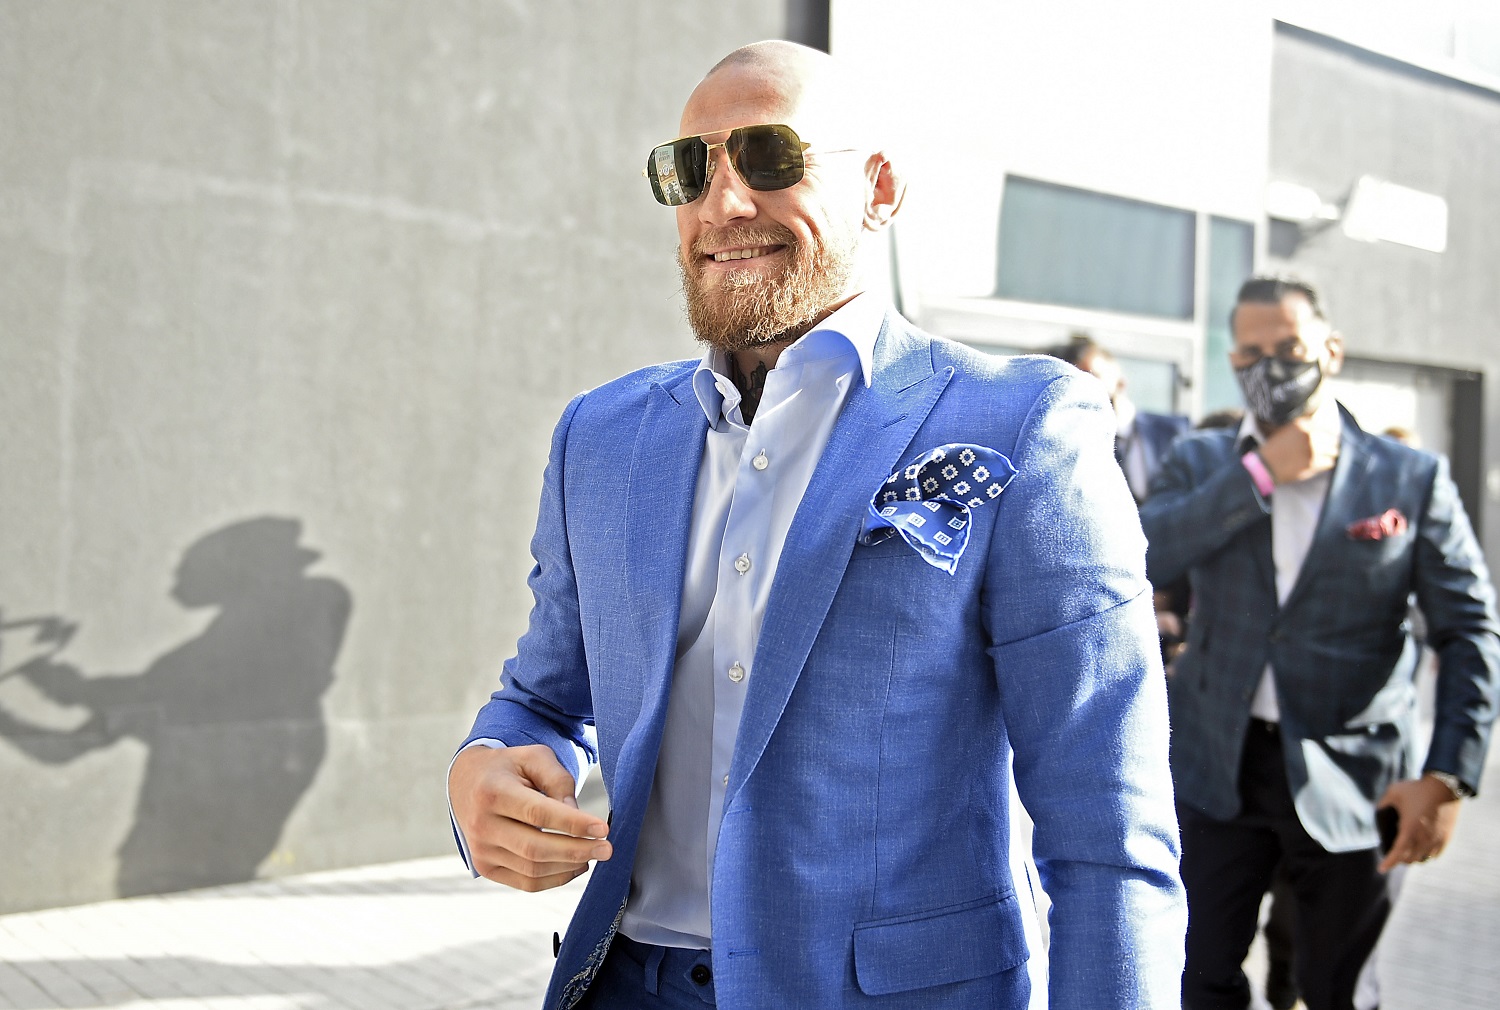 Conor McGregor continues to add to his business holdings outside is UFC career.